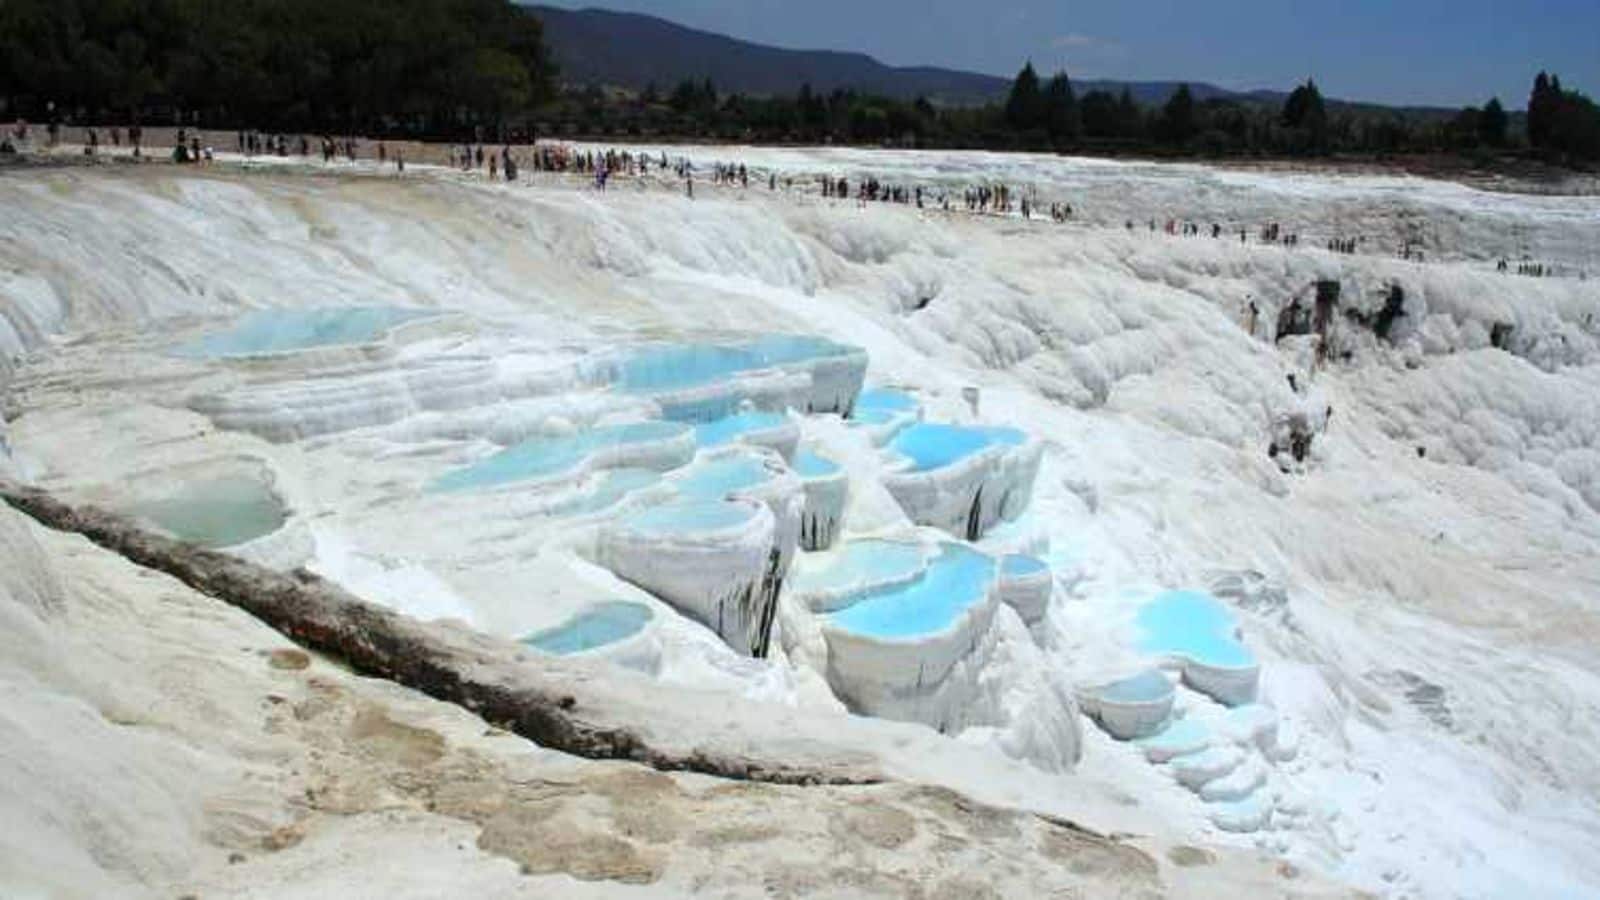 Travel to Pamukkale, Turkey for a tranquil thermal experience